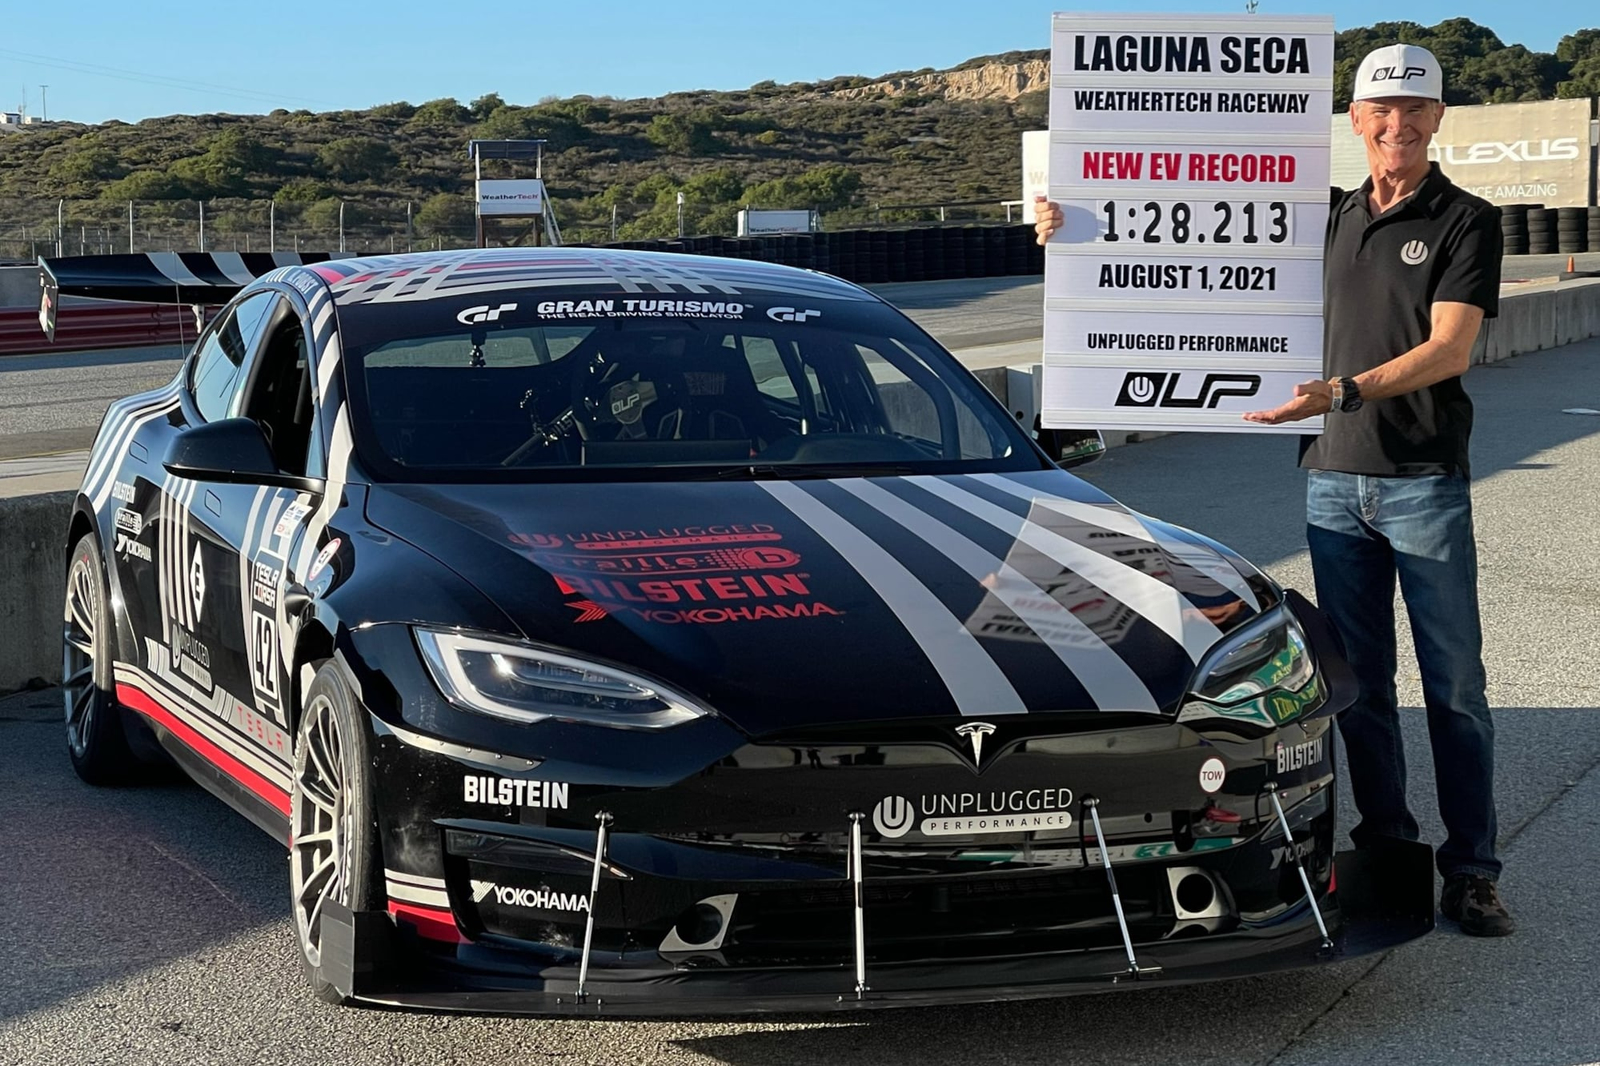 motorsport, laguna seca's future secured for generations of enthusiasts